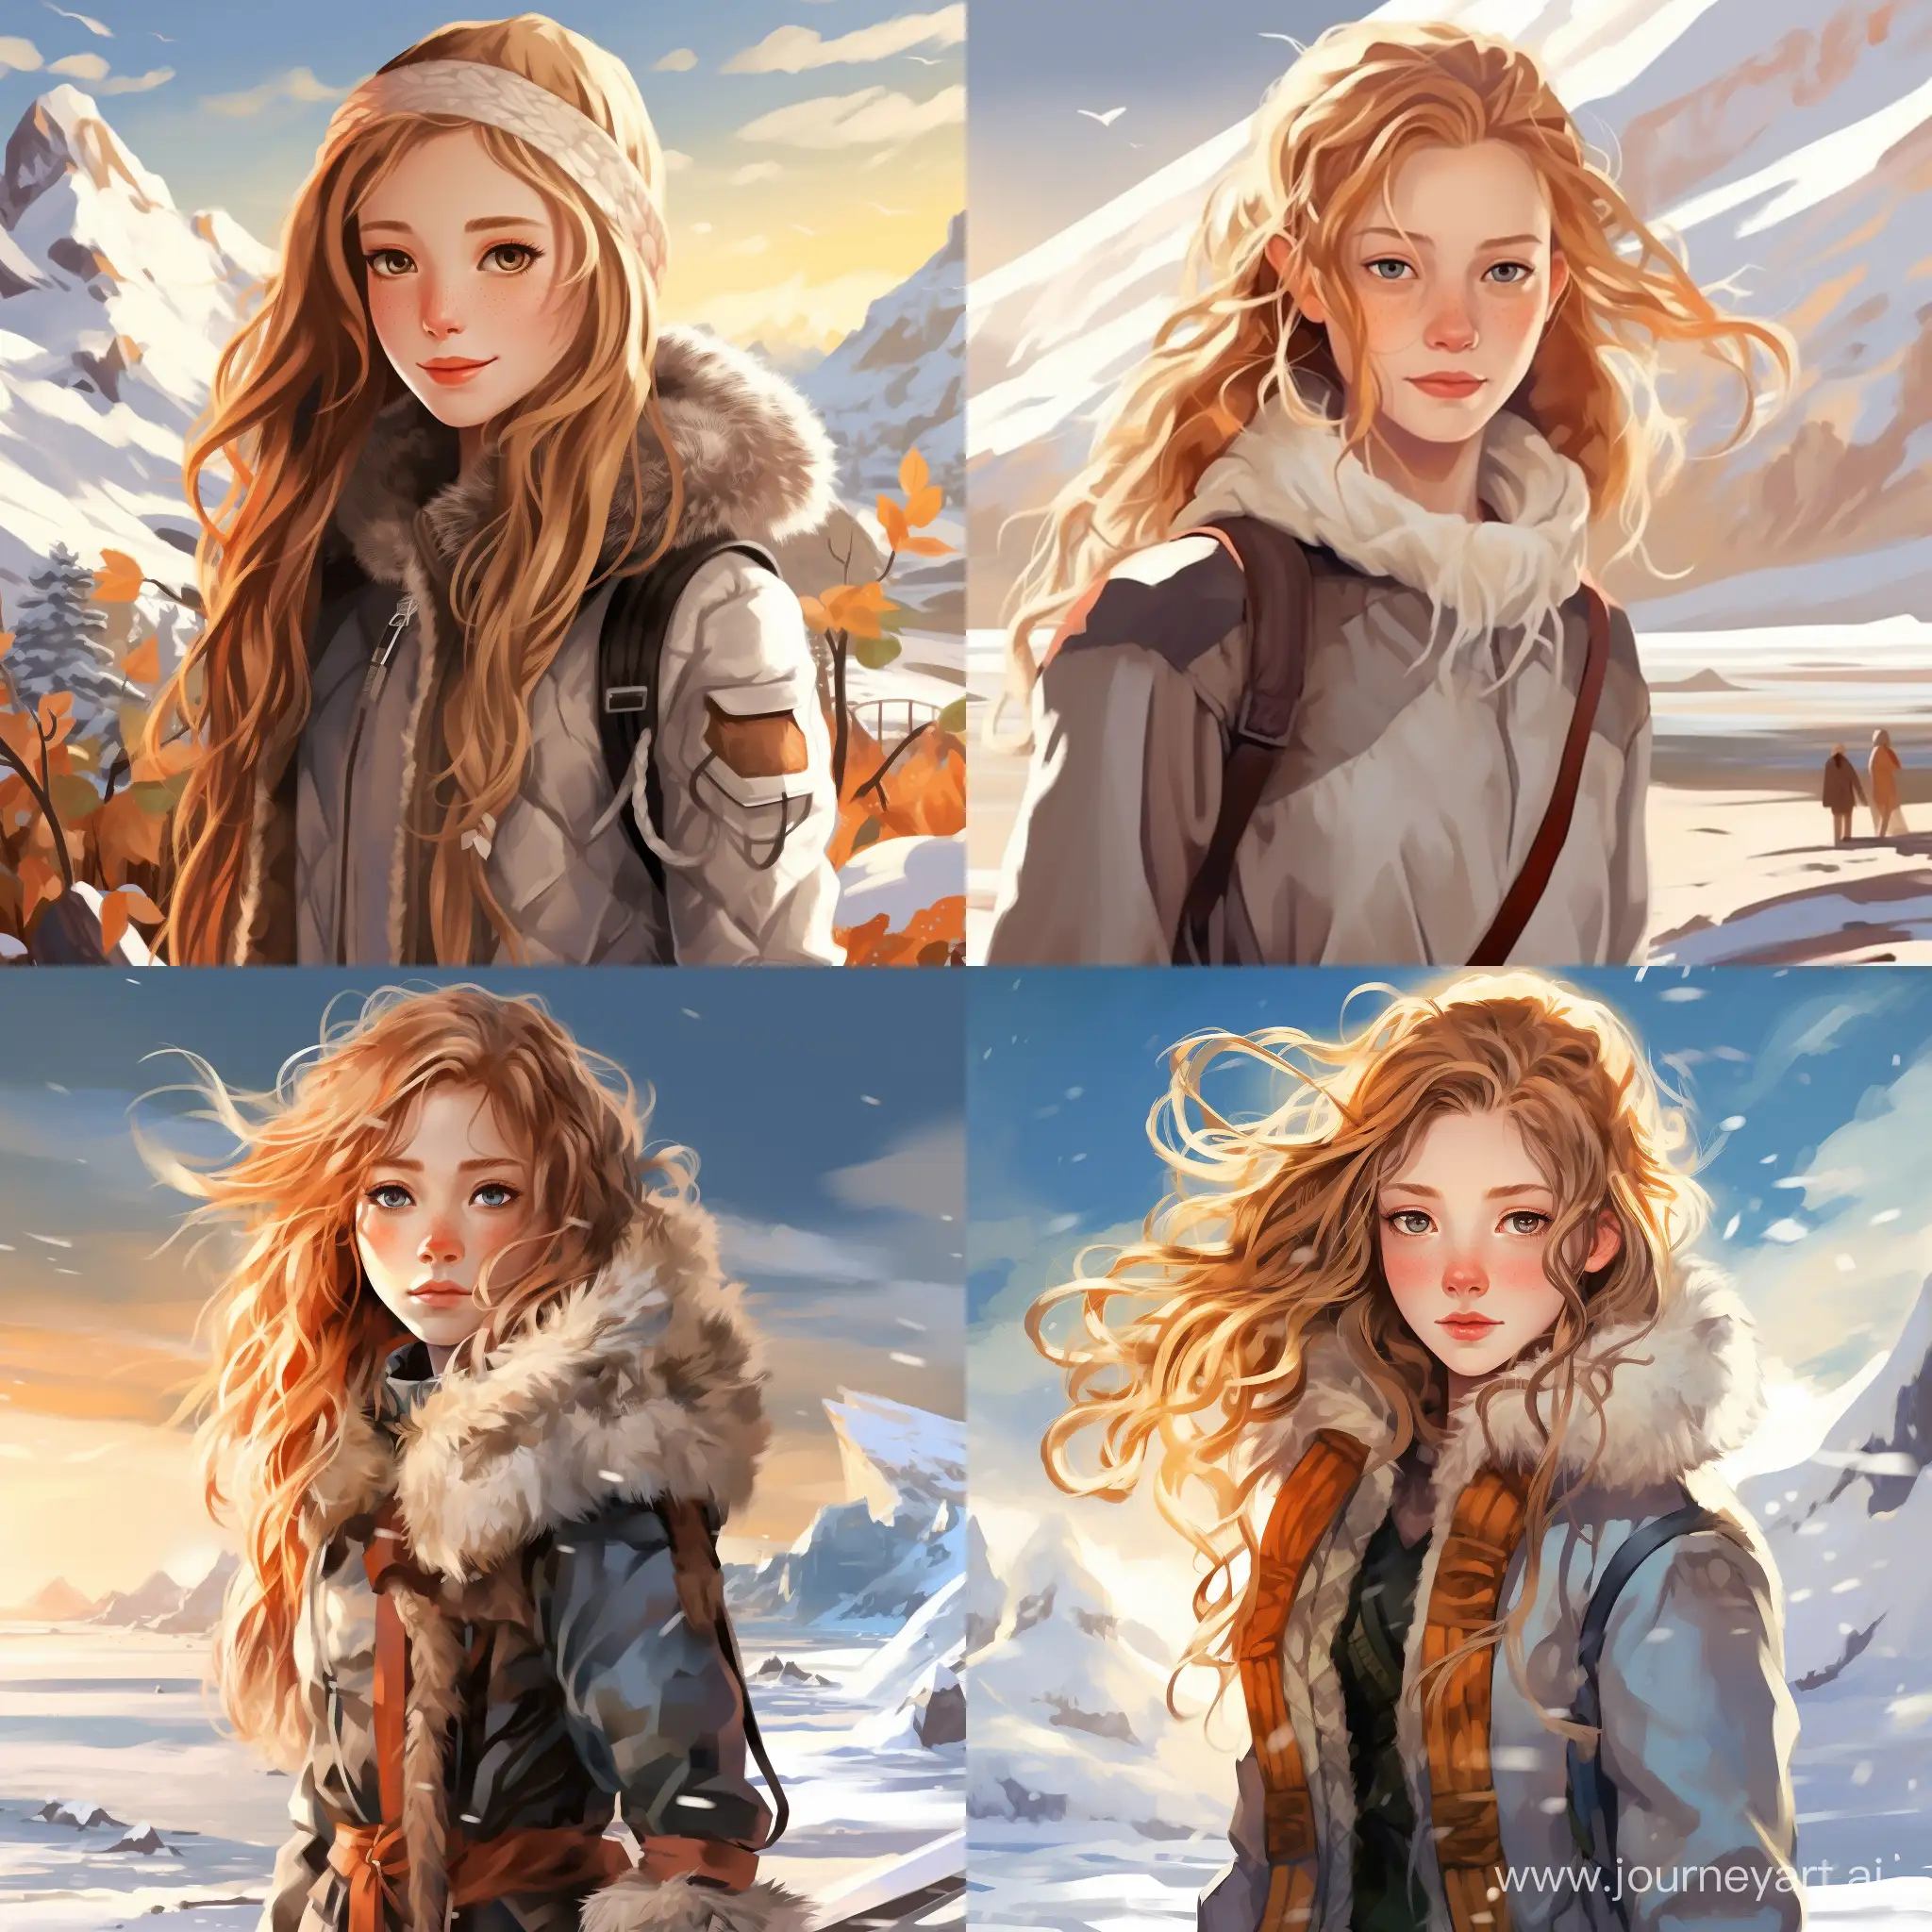 Beautiful girl, golden hair, gray-blue eyes, snow-white skin, teenager, 14 years old, nice, cozy, cute, avatar style legend of aang, journey near the sea, high quality, high detail, cartoon art